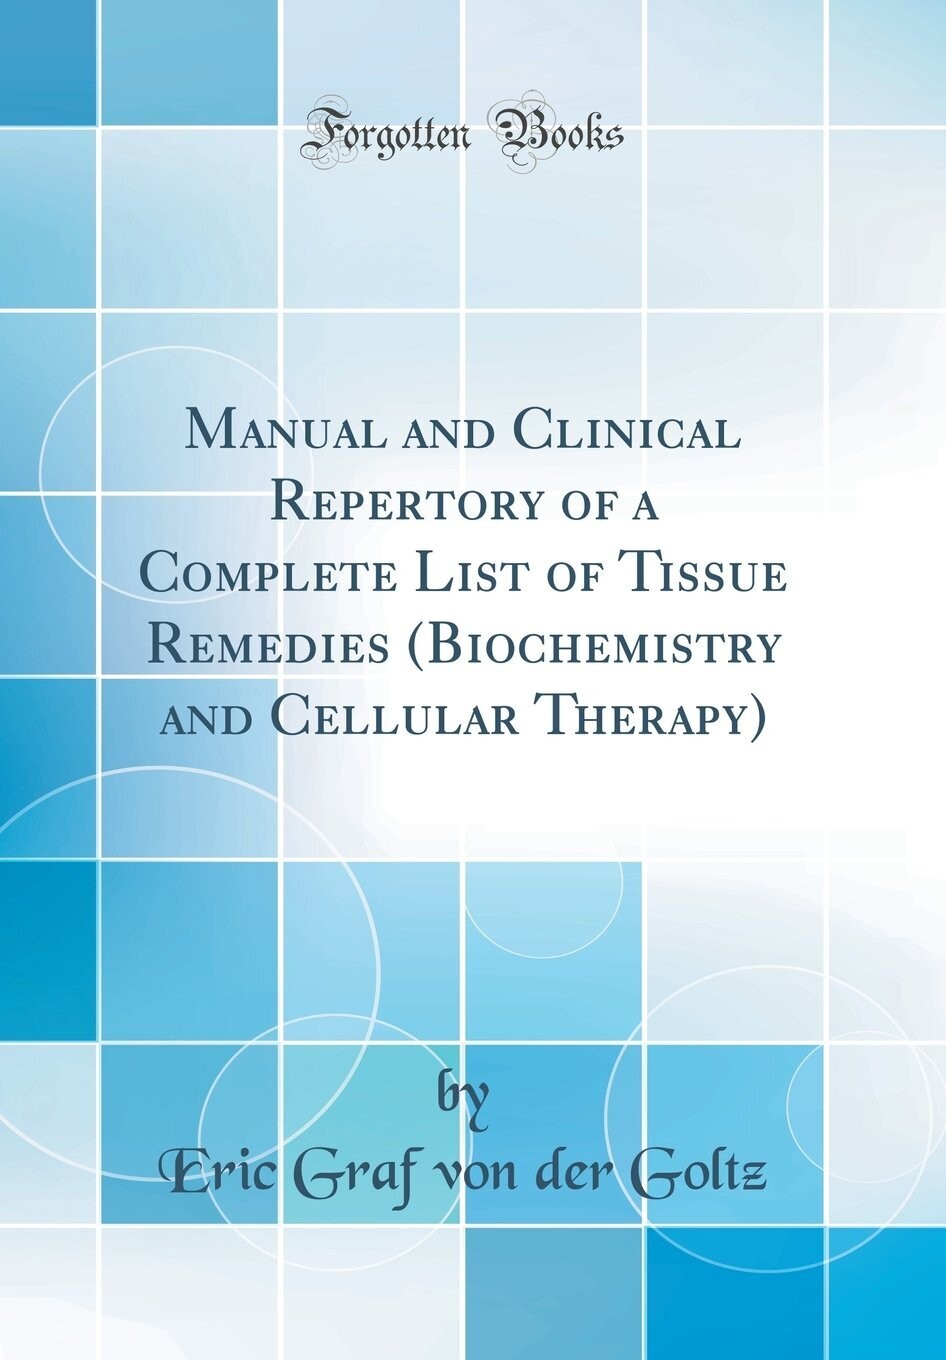 Biochemical practice, manual and clinical repertory of a complete list of tissue remedies* (Goltz)